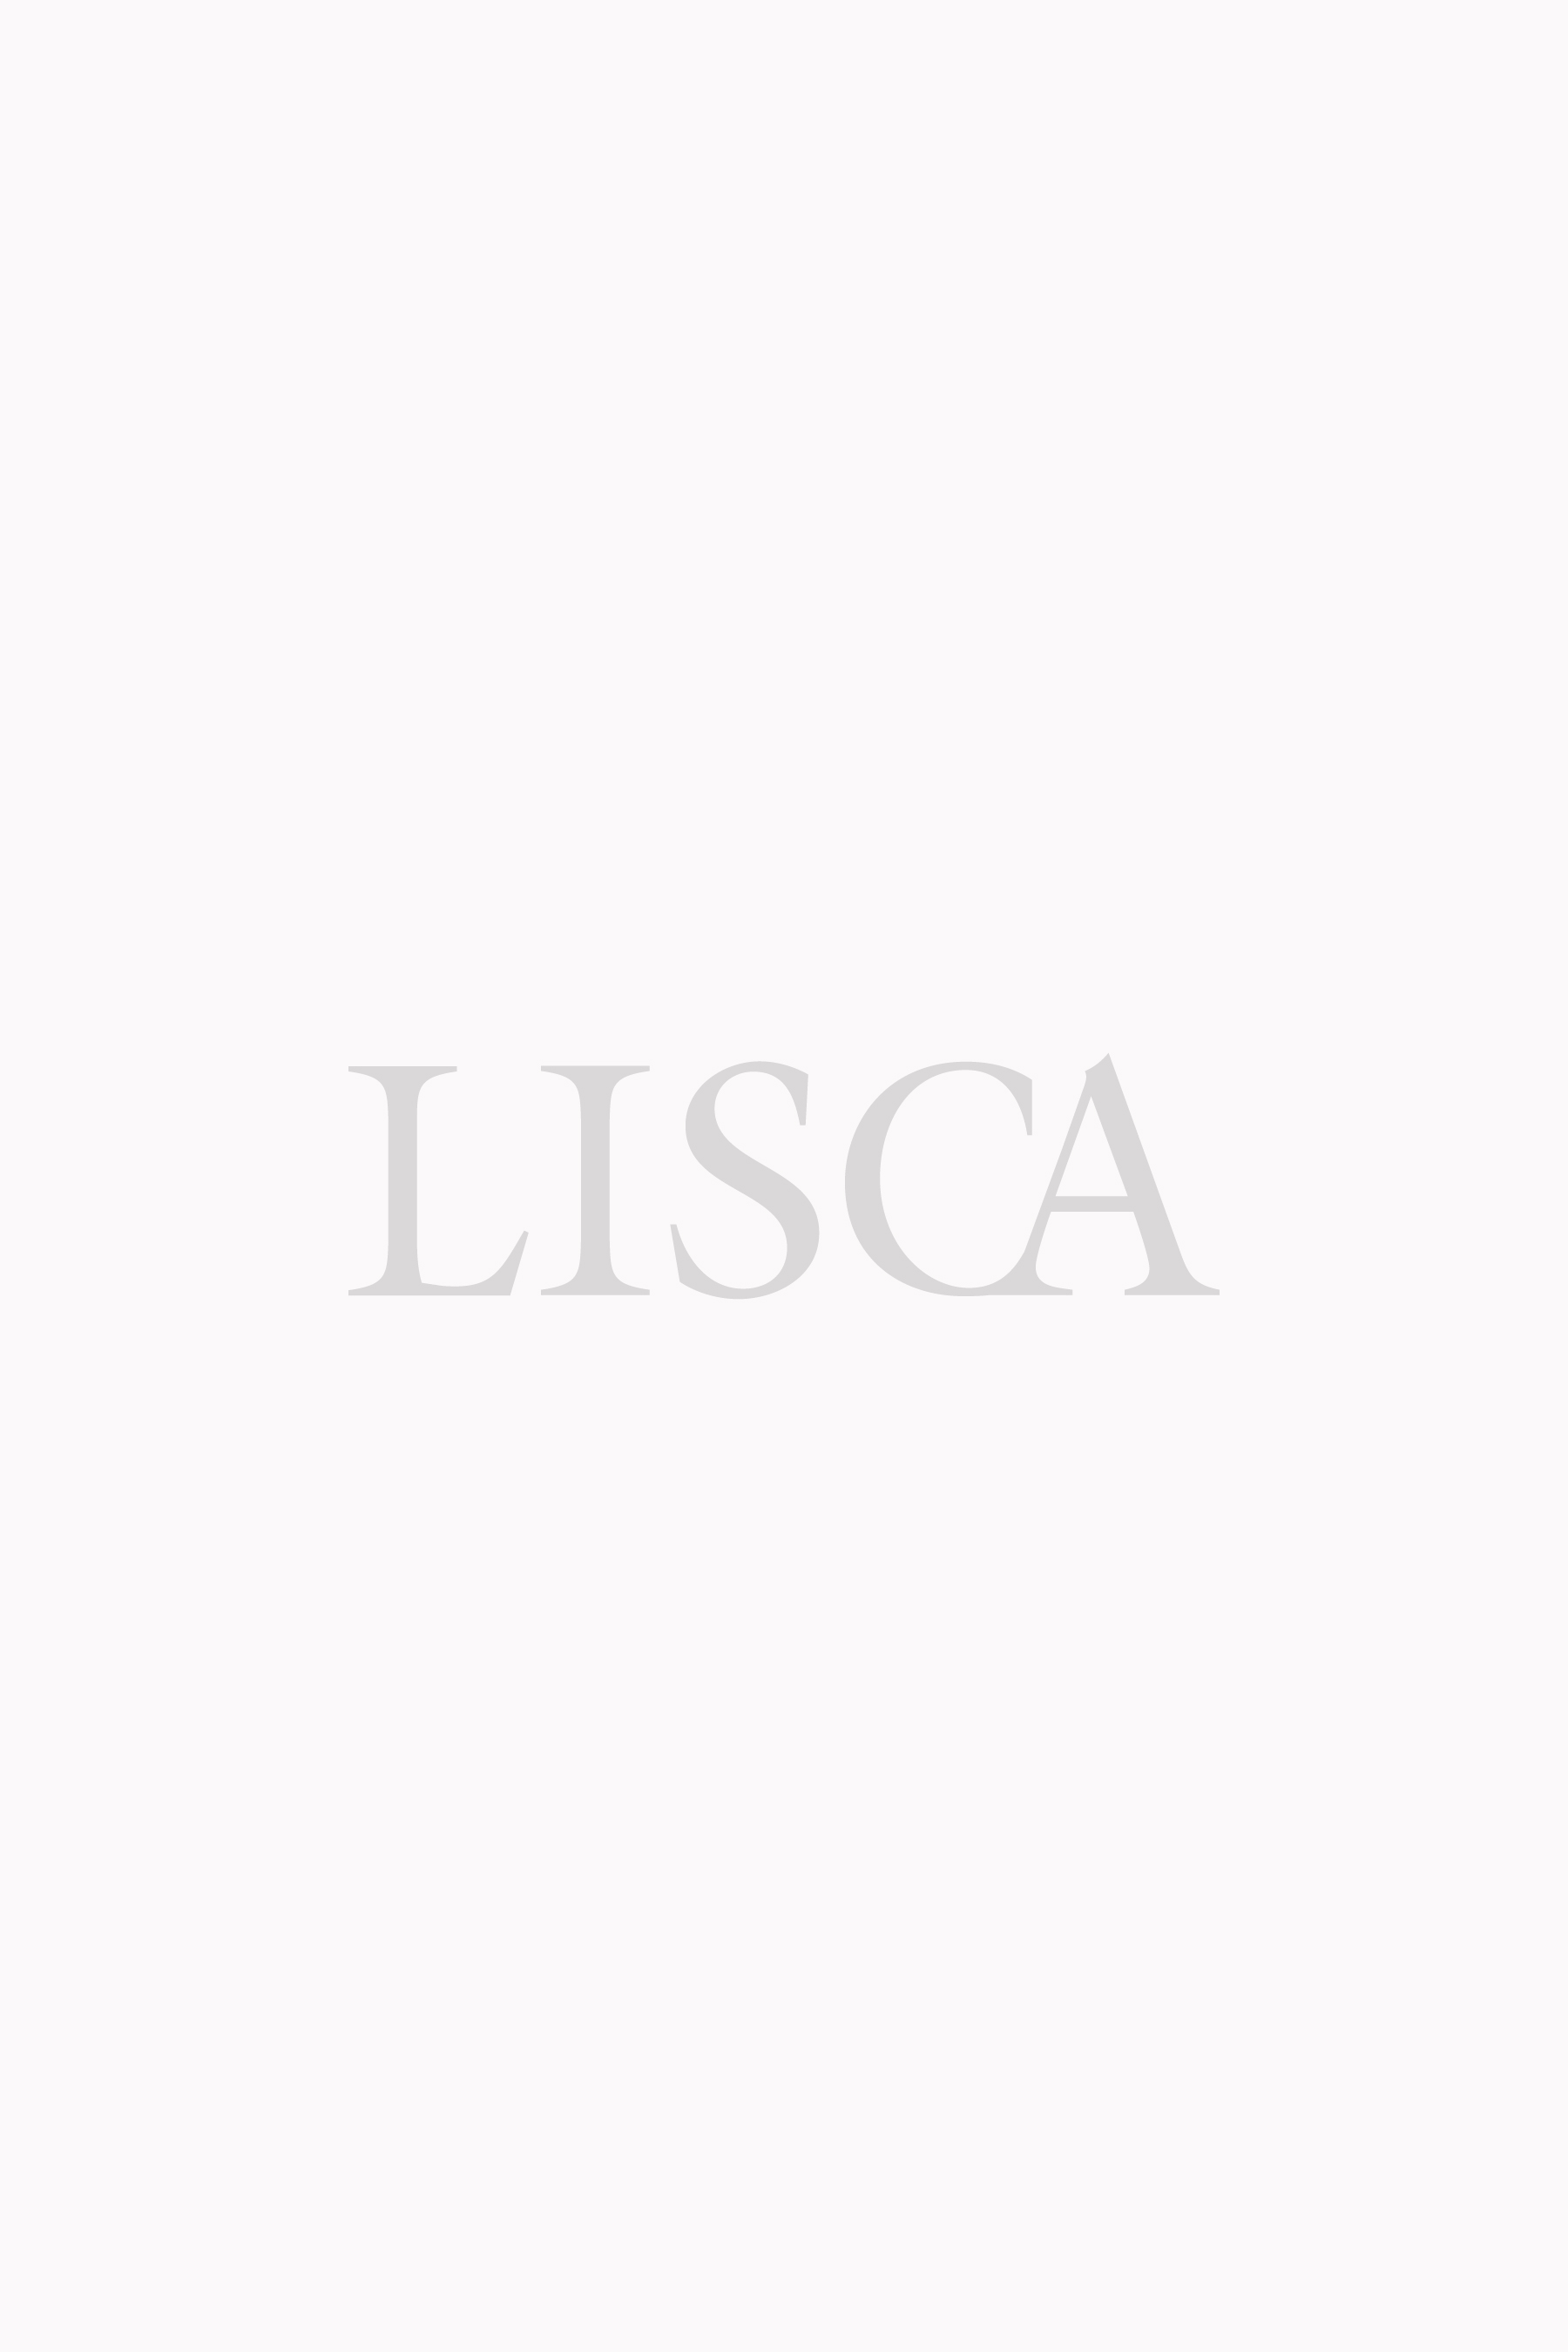 An opening of Lisca store in Ljubljana